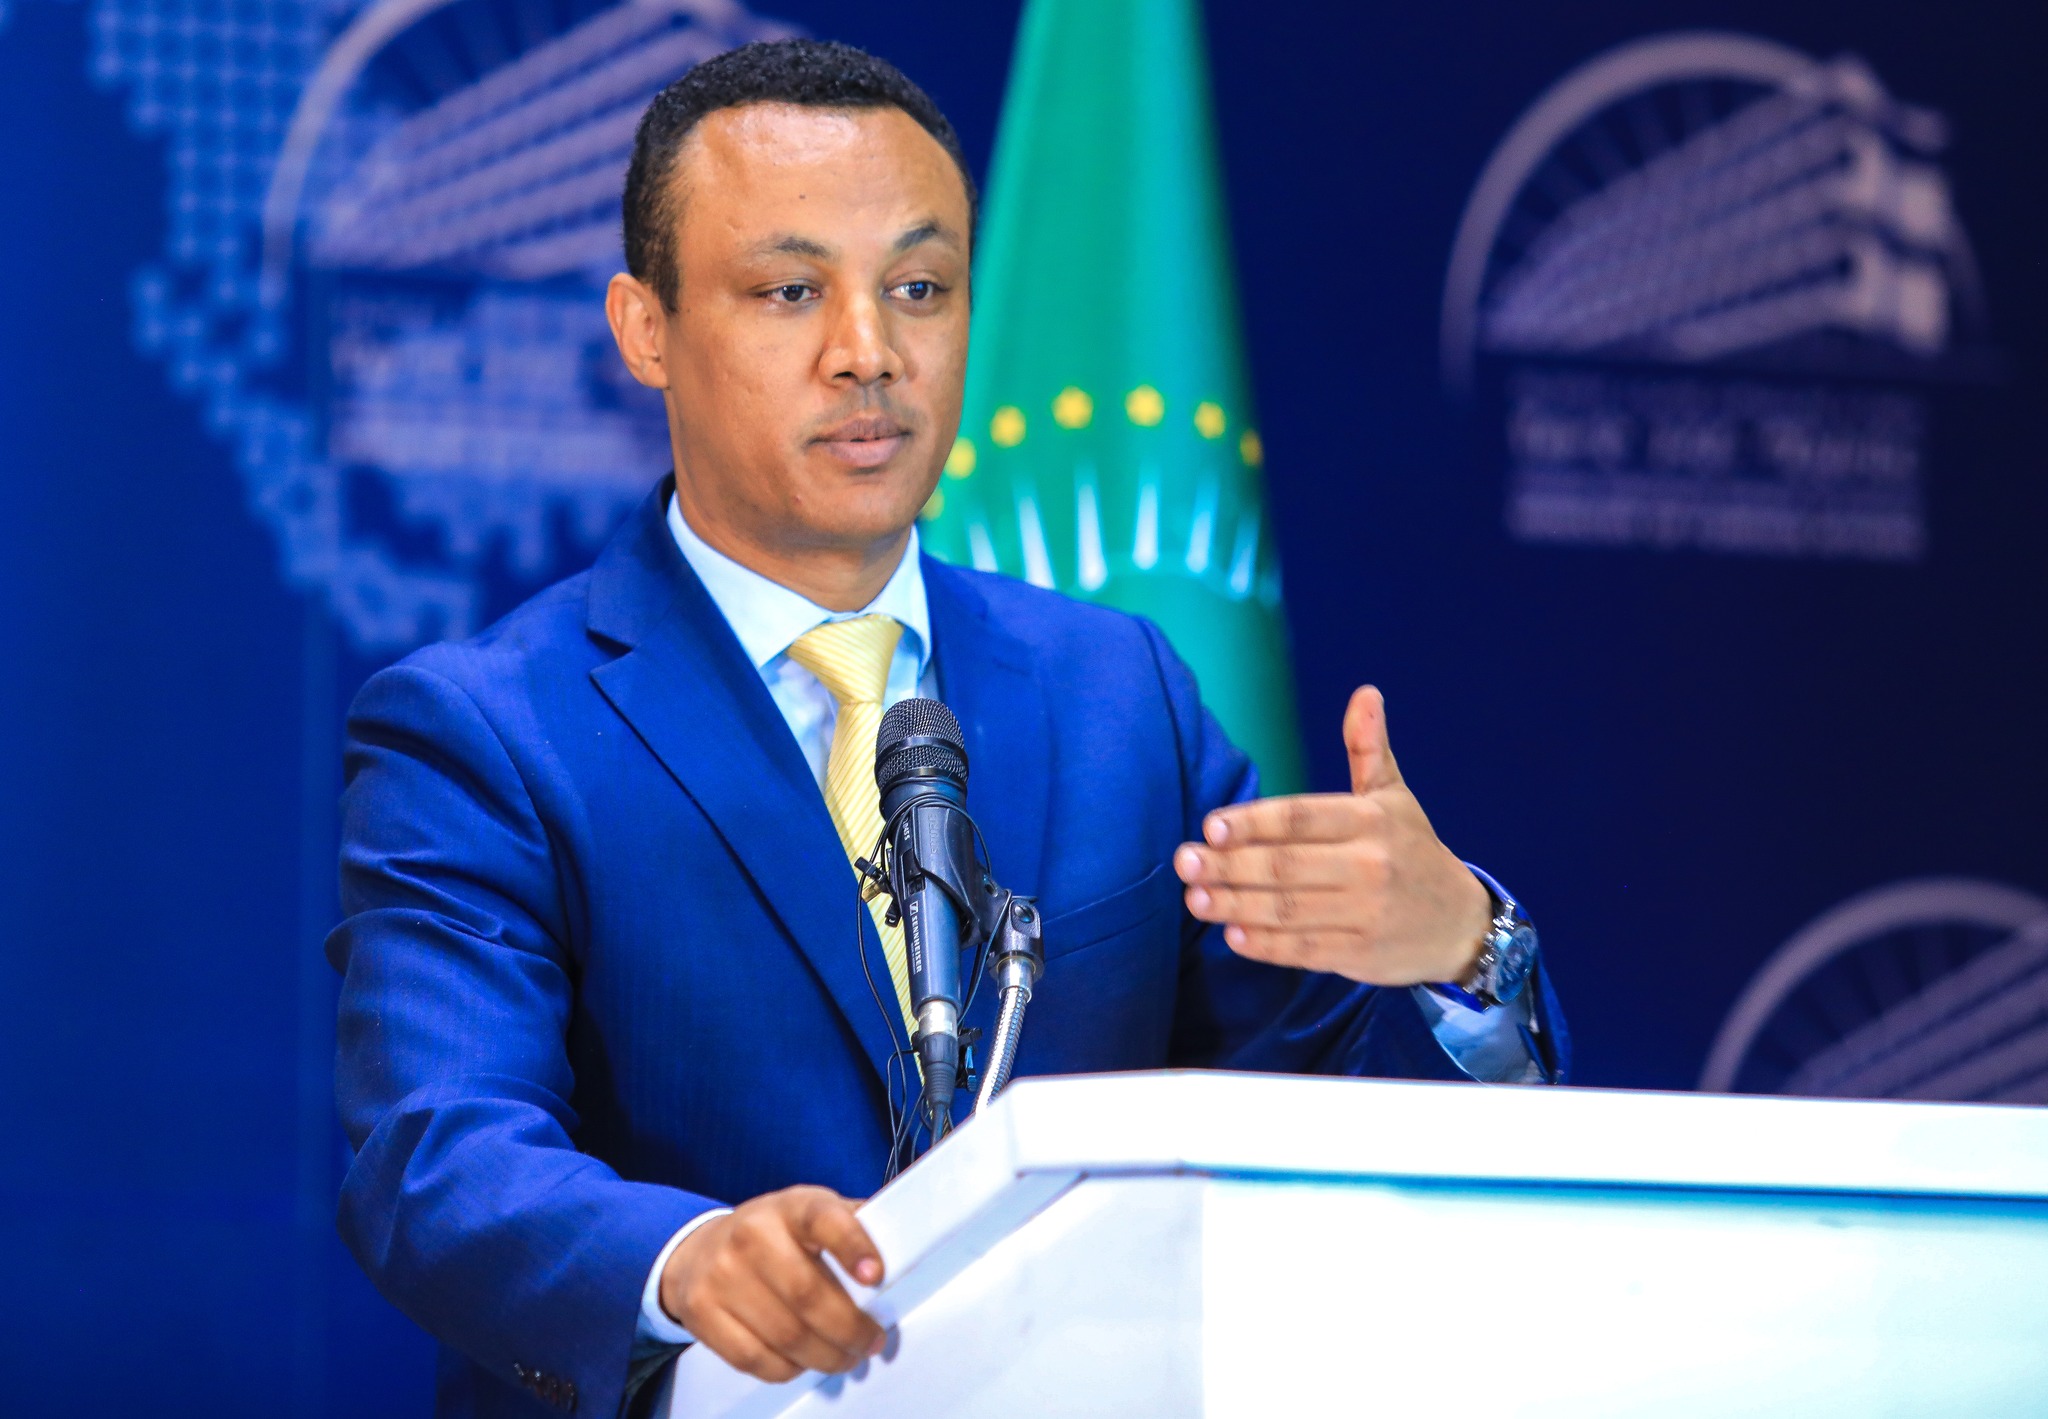 Ethiopia Says It Achieved Diplomatic Gains Over the Last Six Years